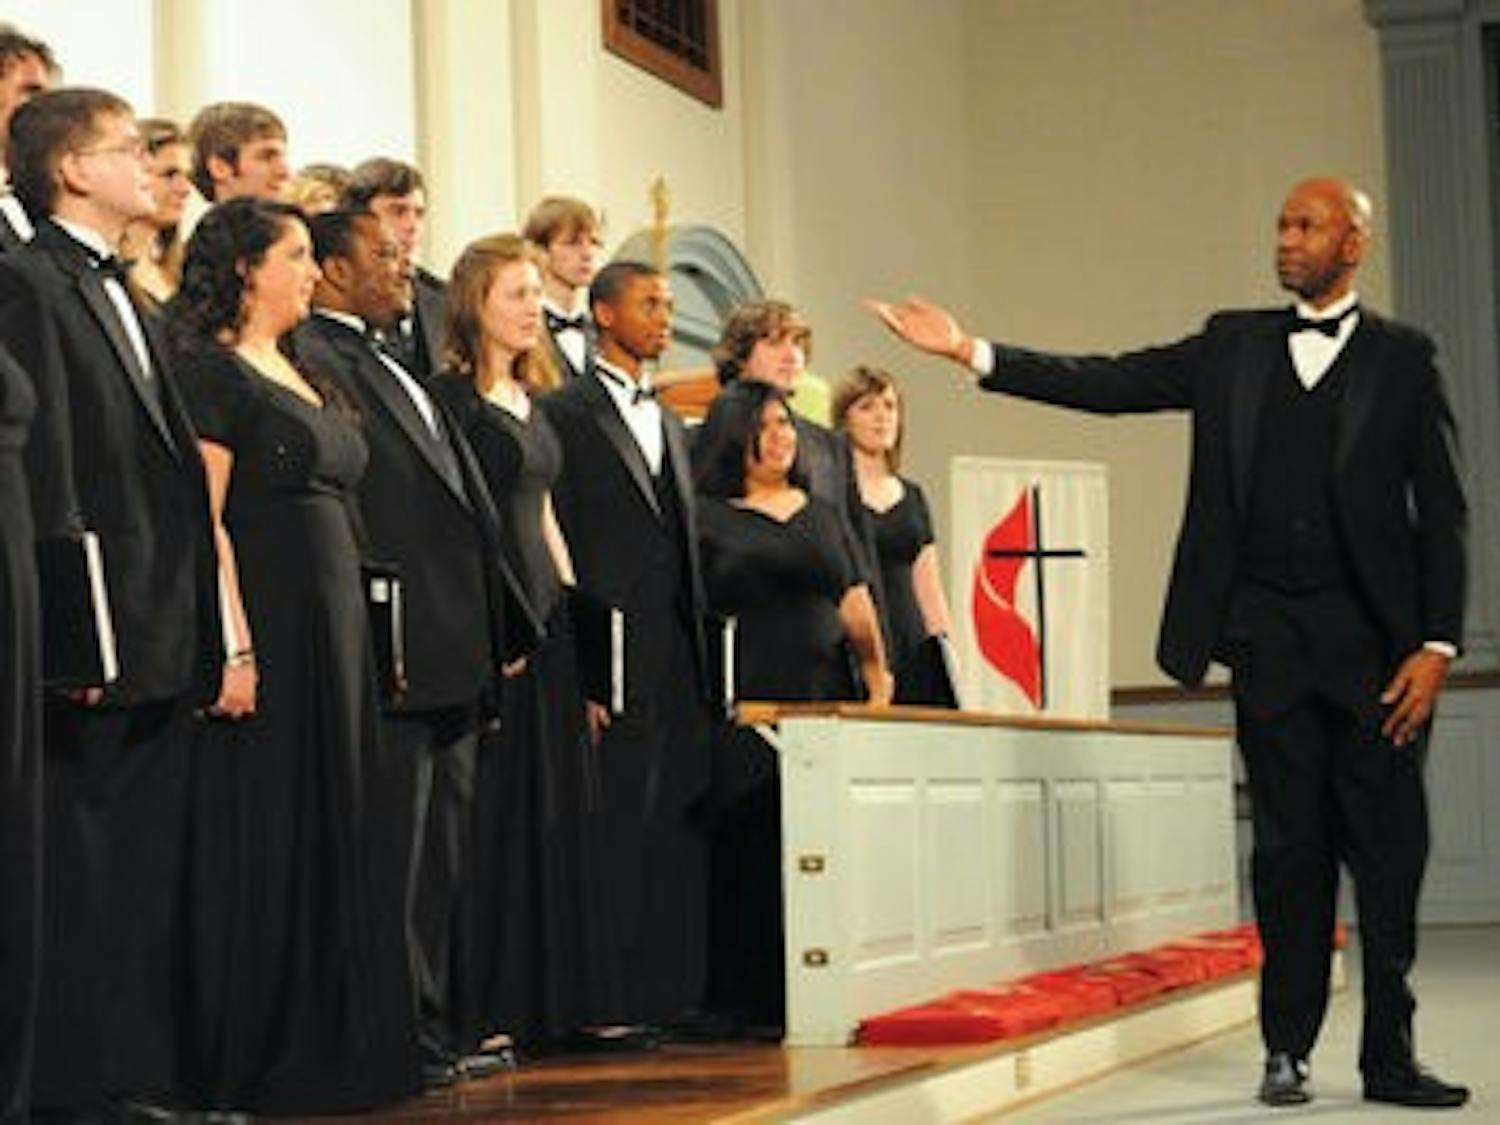 William Powell introduces the Auburn University Chamber Choir at Saturday's concert. (Christen Harned / Assistant Photo Editor)